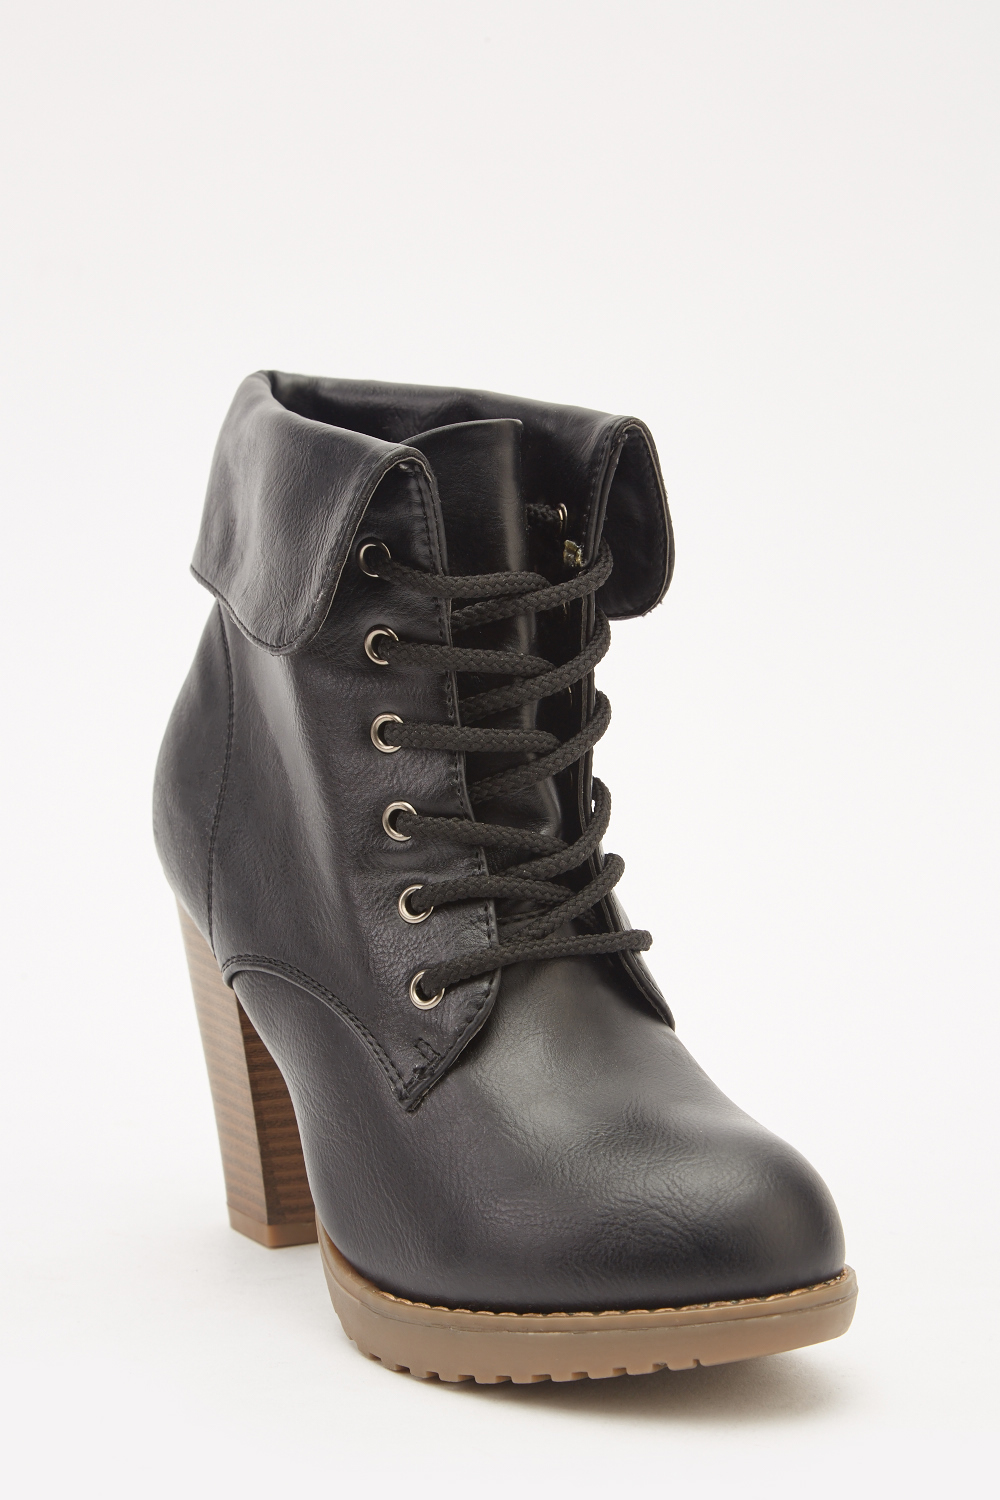 Lace Up Heeled Biker Boots - Just $6